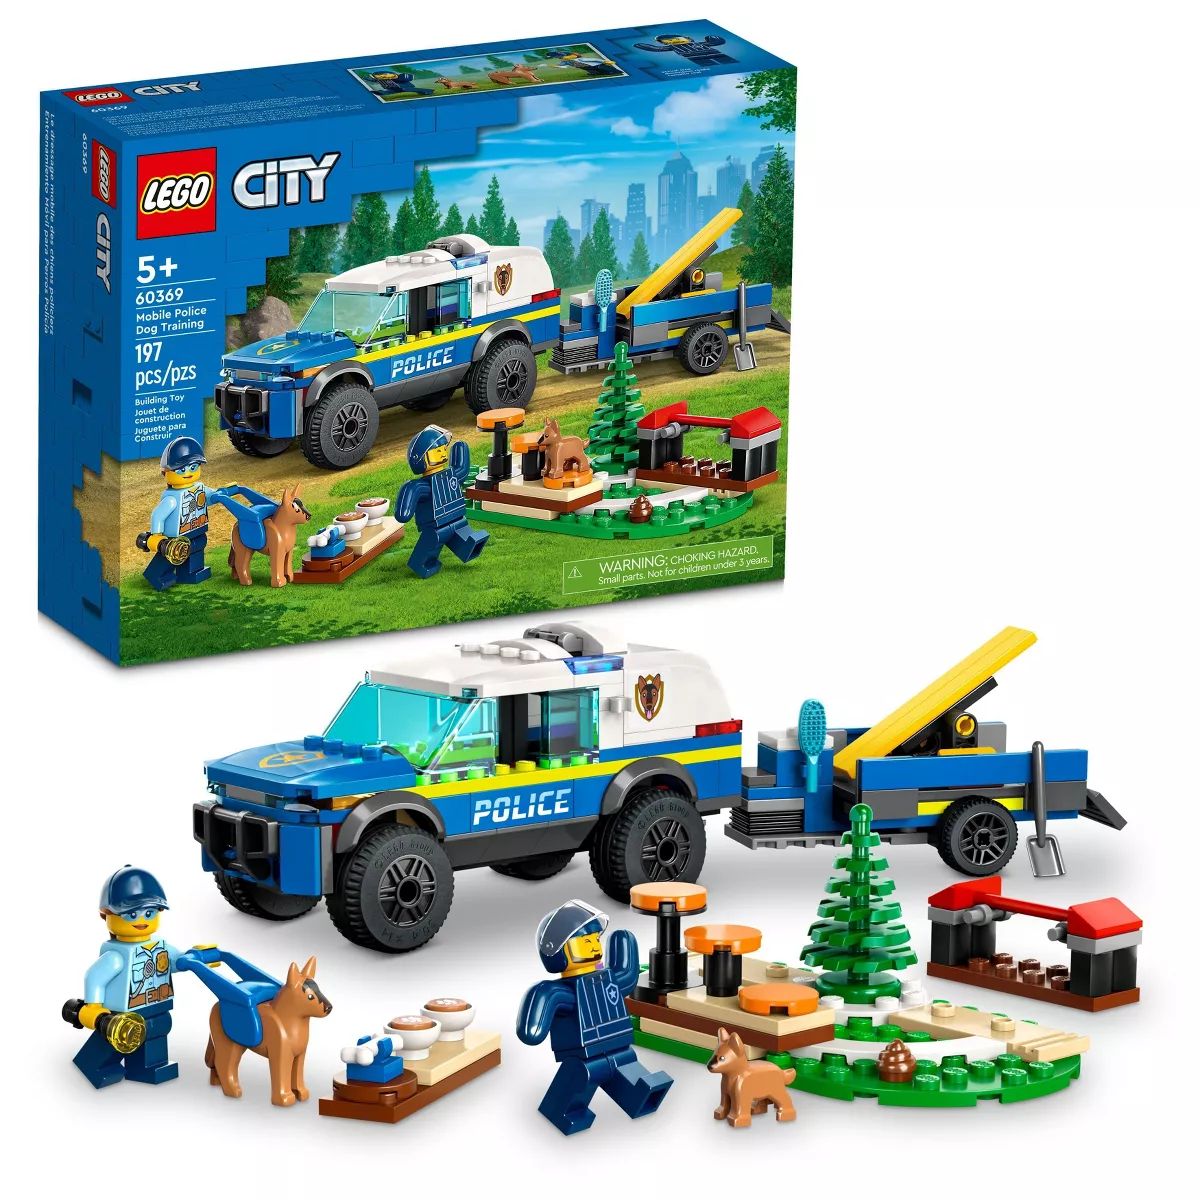 LEGO City Mobile Police Dog Training Set with Toy Car 60369 | Target